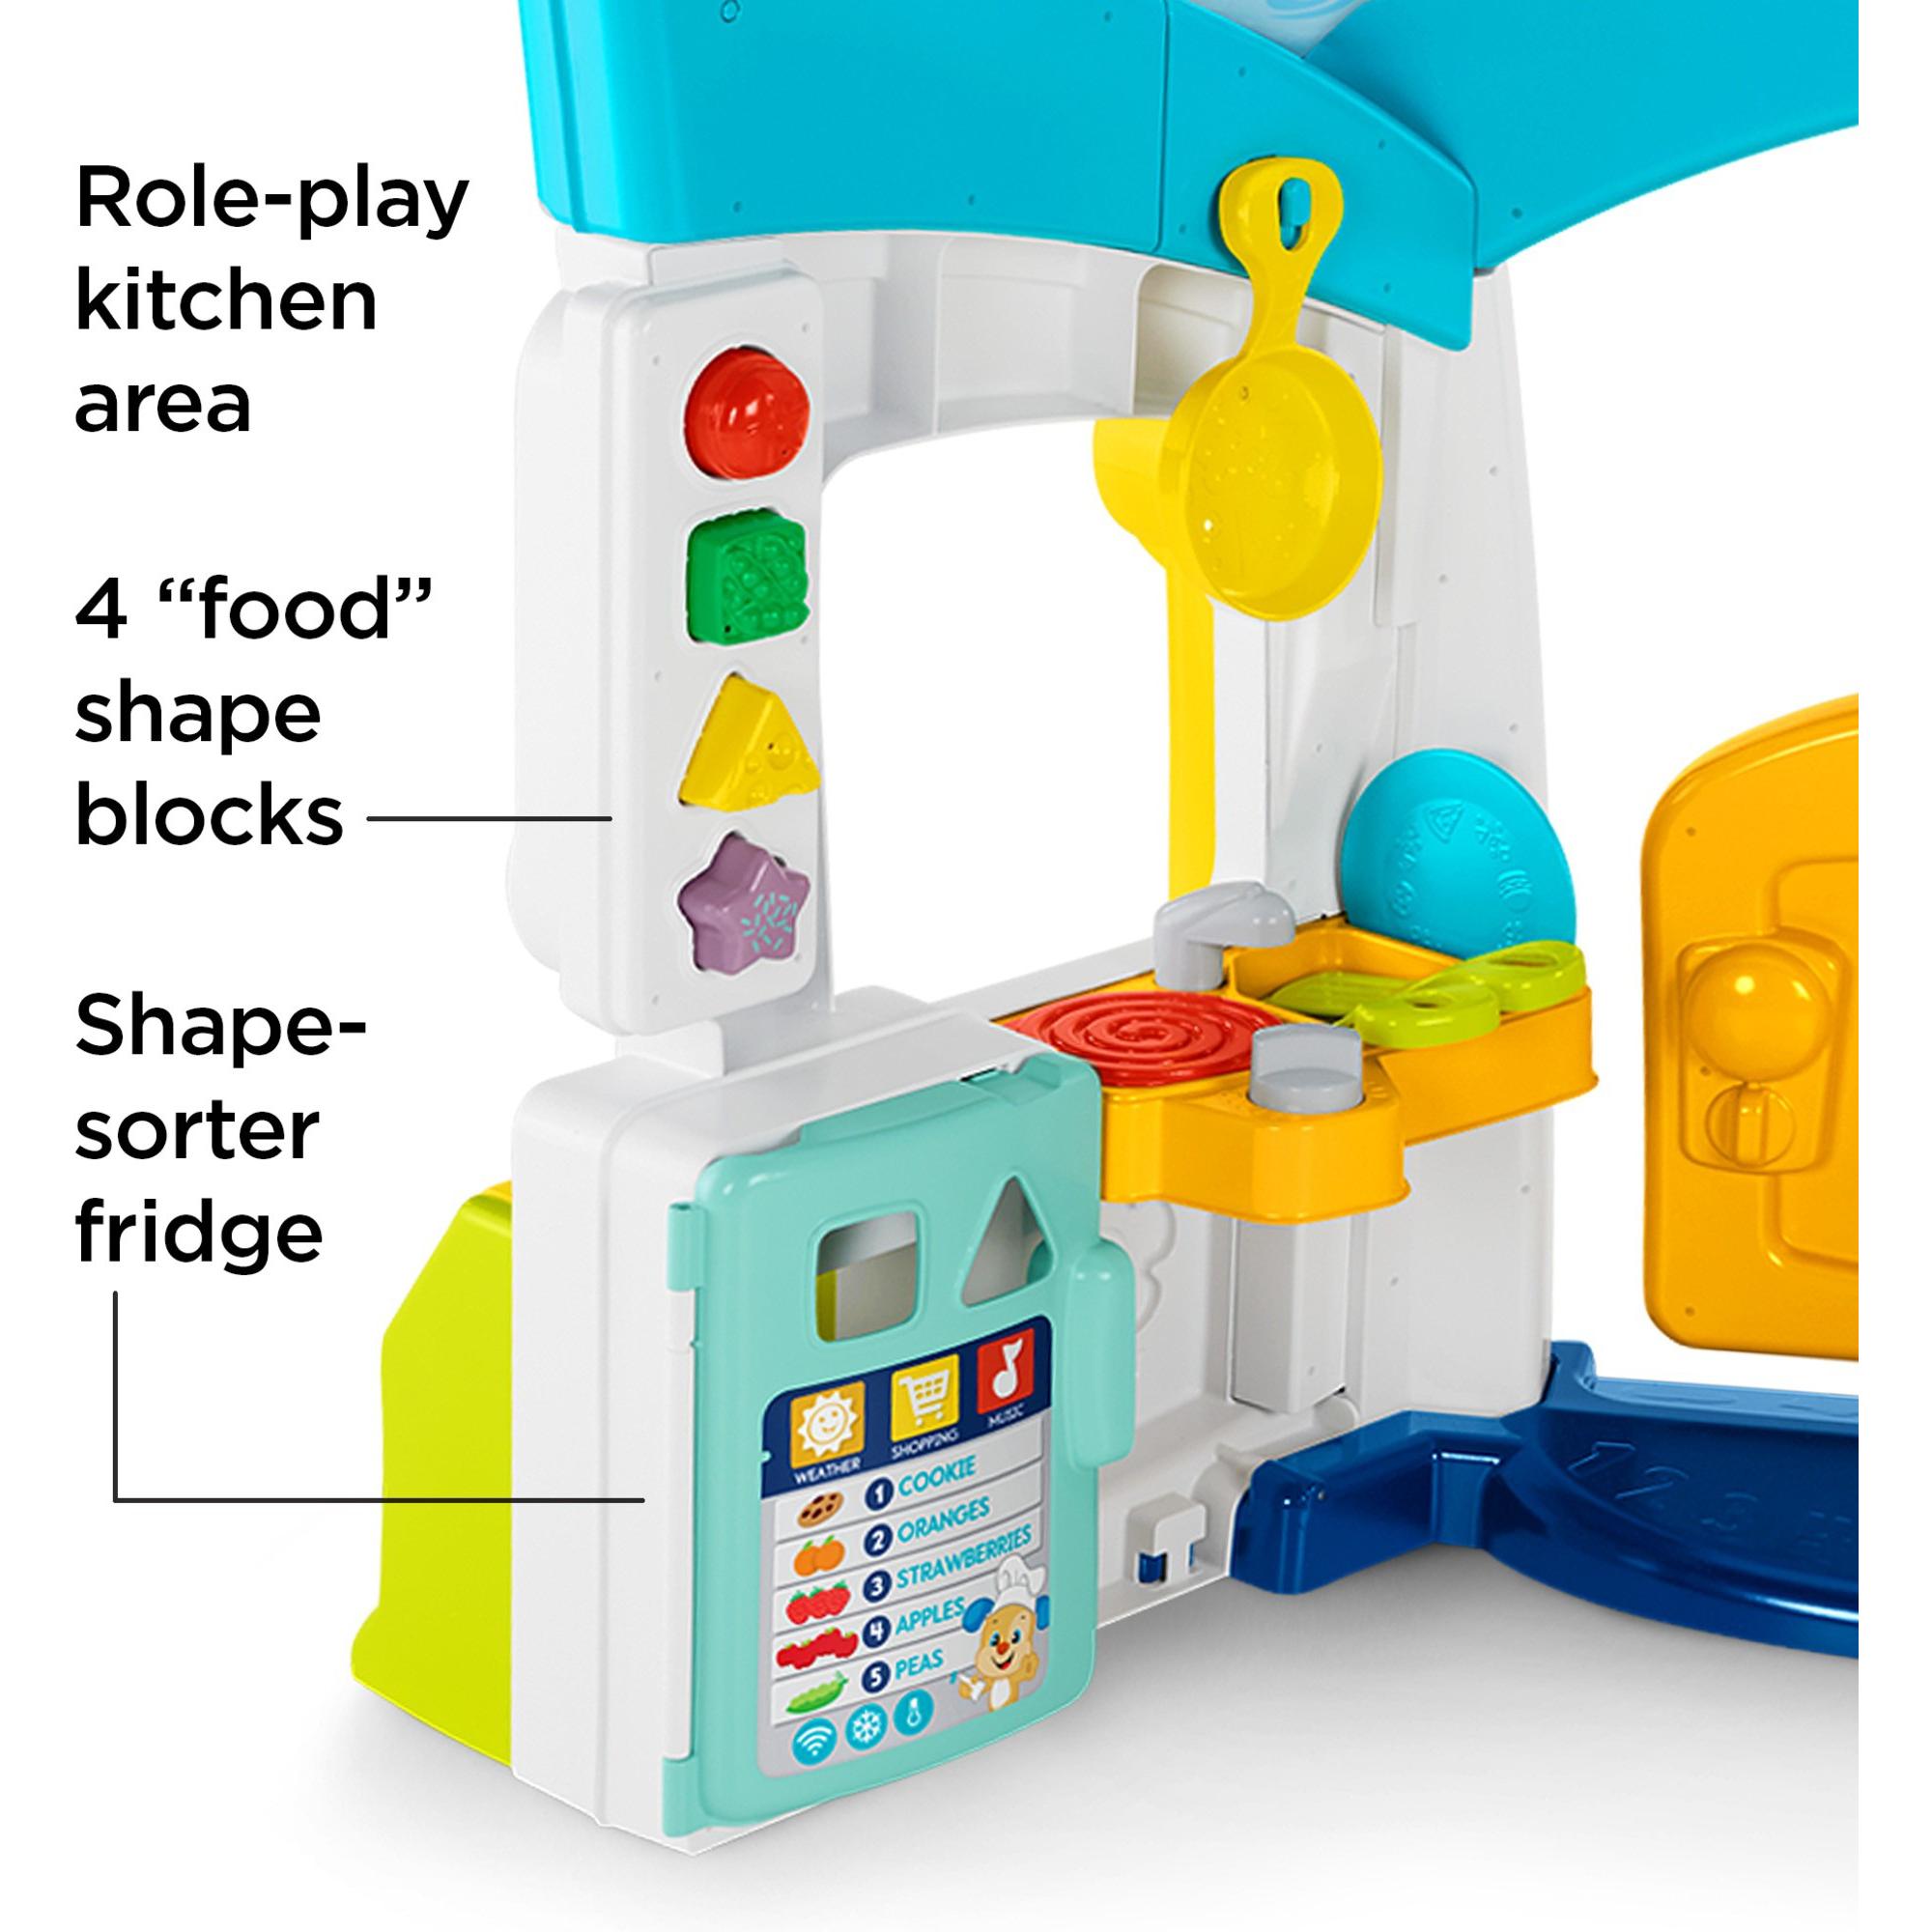 Fisher-Price Laugh & Learn Playhouse Educational Toy for Babies & Toddlers, Smart Learning Home - image 9 of 25